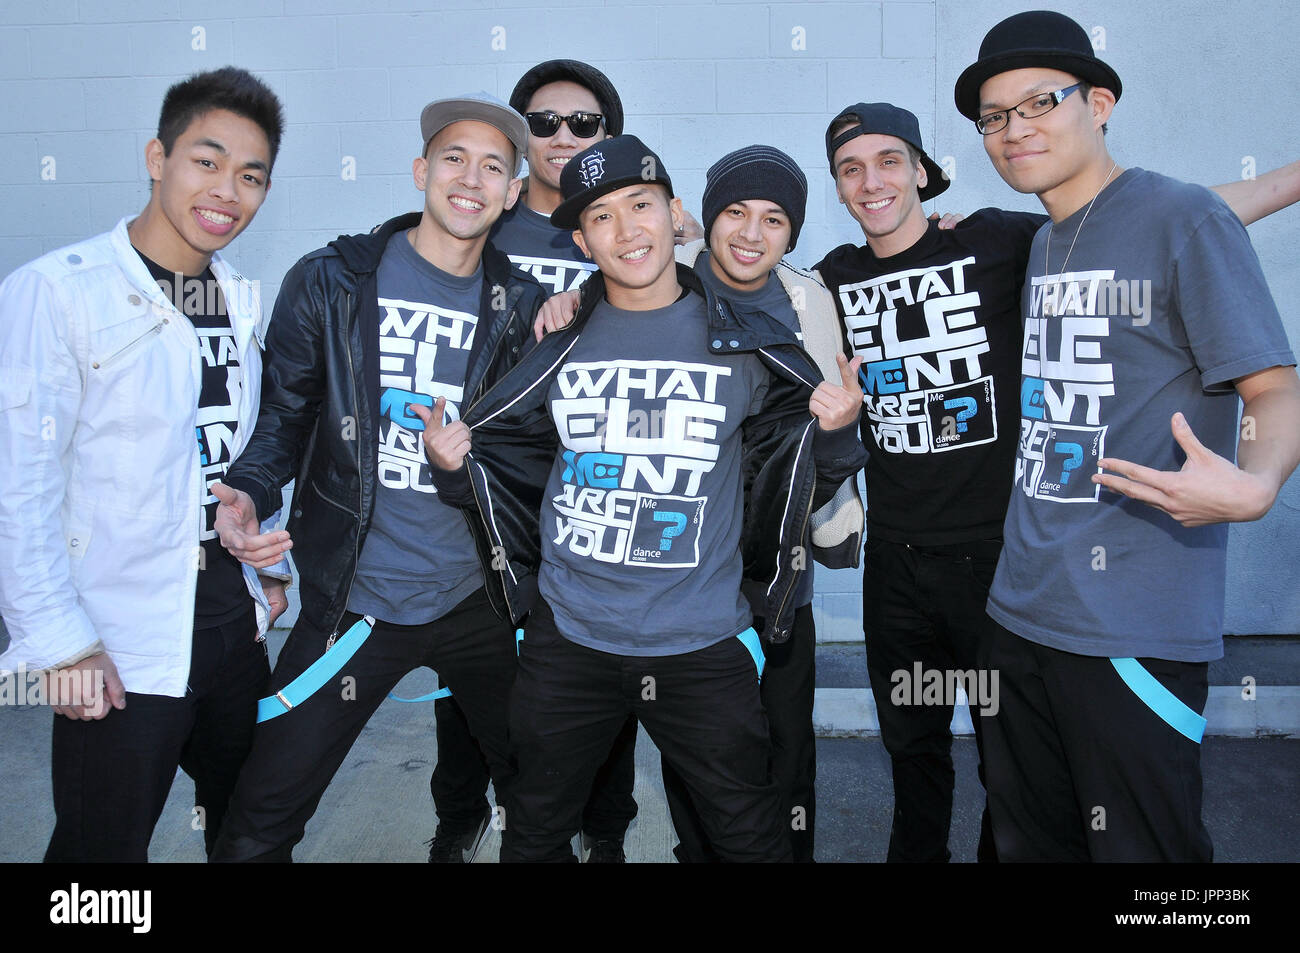 Mixd Elements 2.0 at Randy Jackson's America's Best Dance Crew Season 7 Season Of The Superstars - Los Angeles Auditions at Center Staging in Burbank, CA. The event took place on Saturday, January 28, 2012. Photo by Sthanlee B. Mirador Pacific Rim Photo Press. Stock Photo